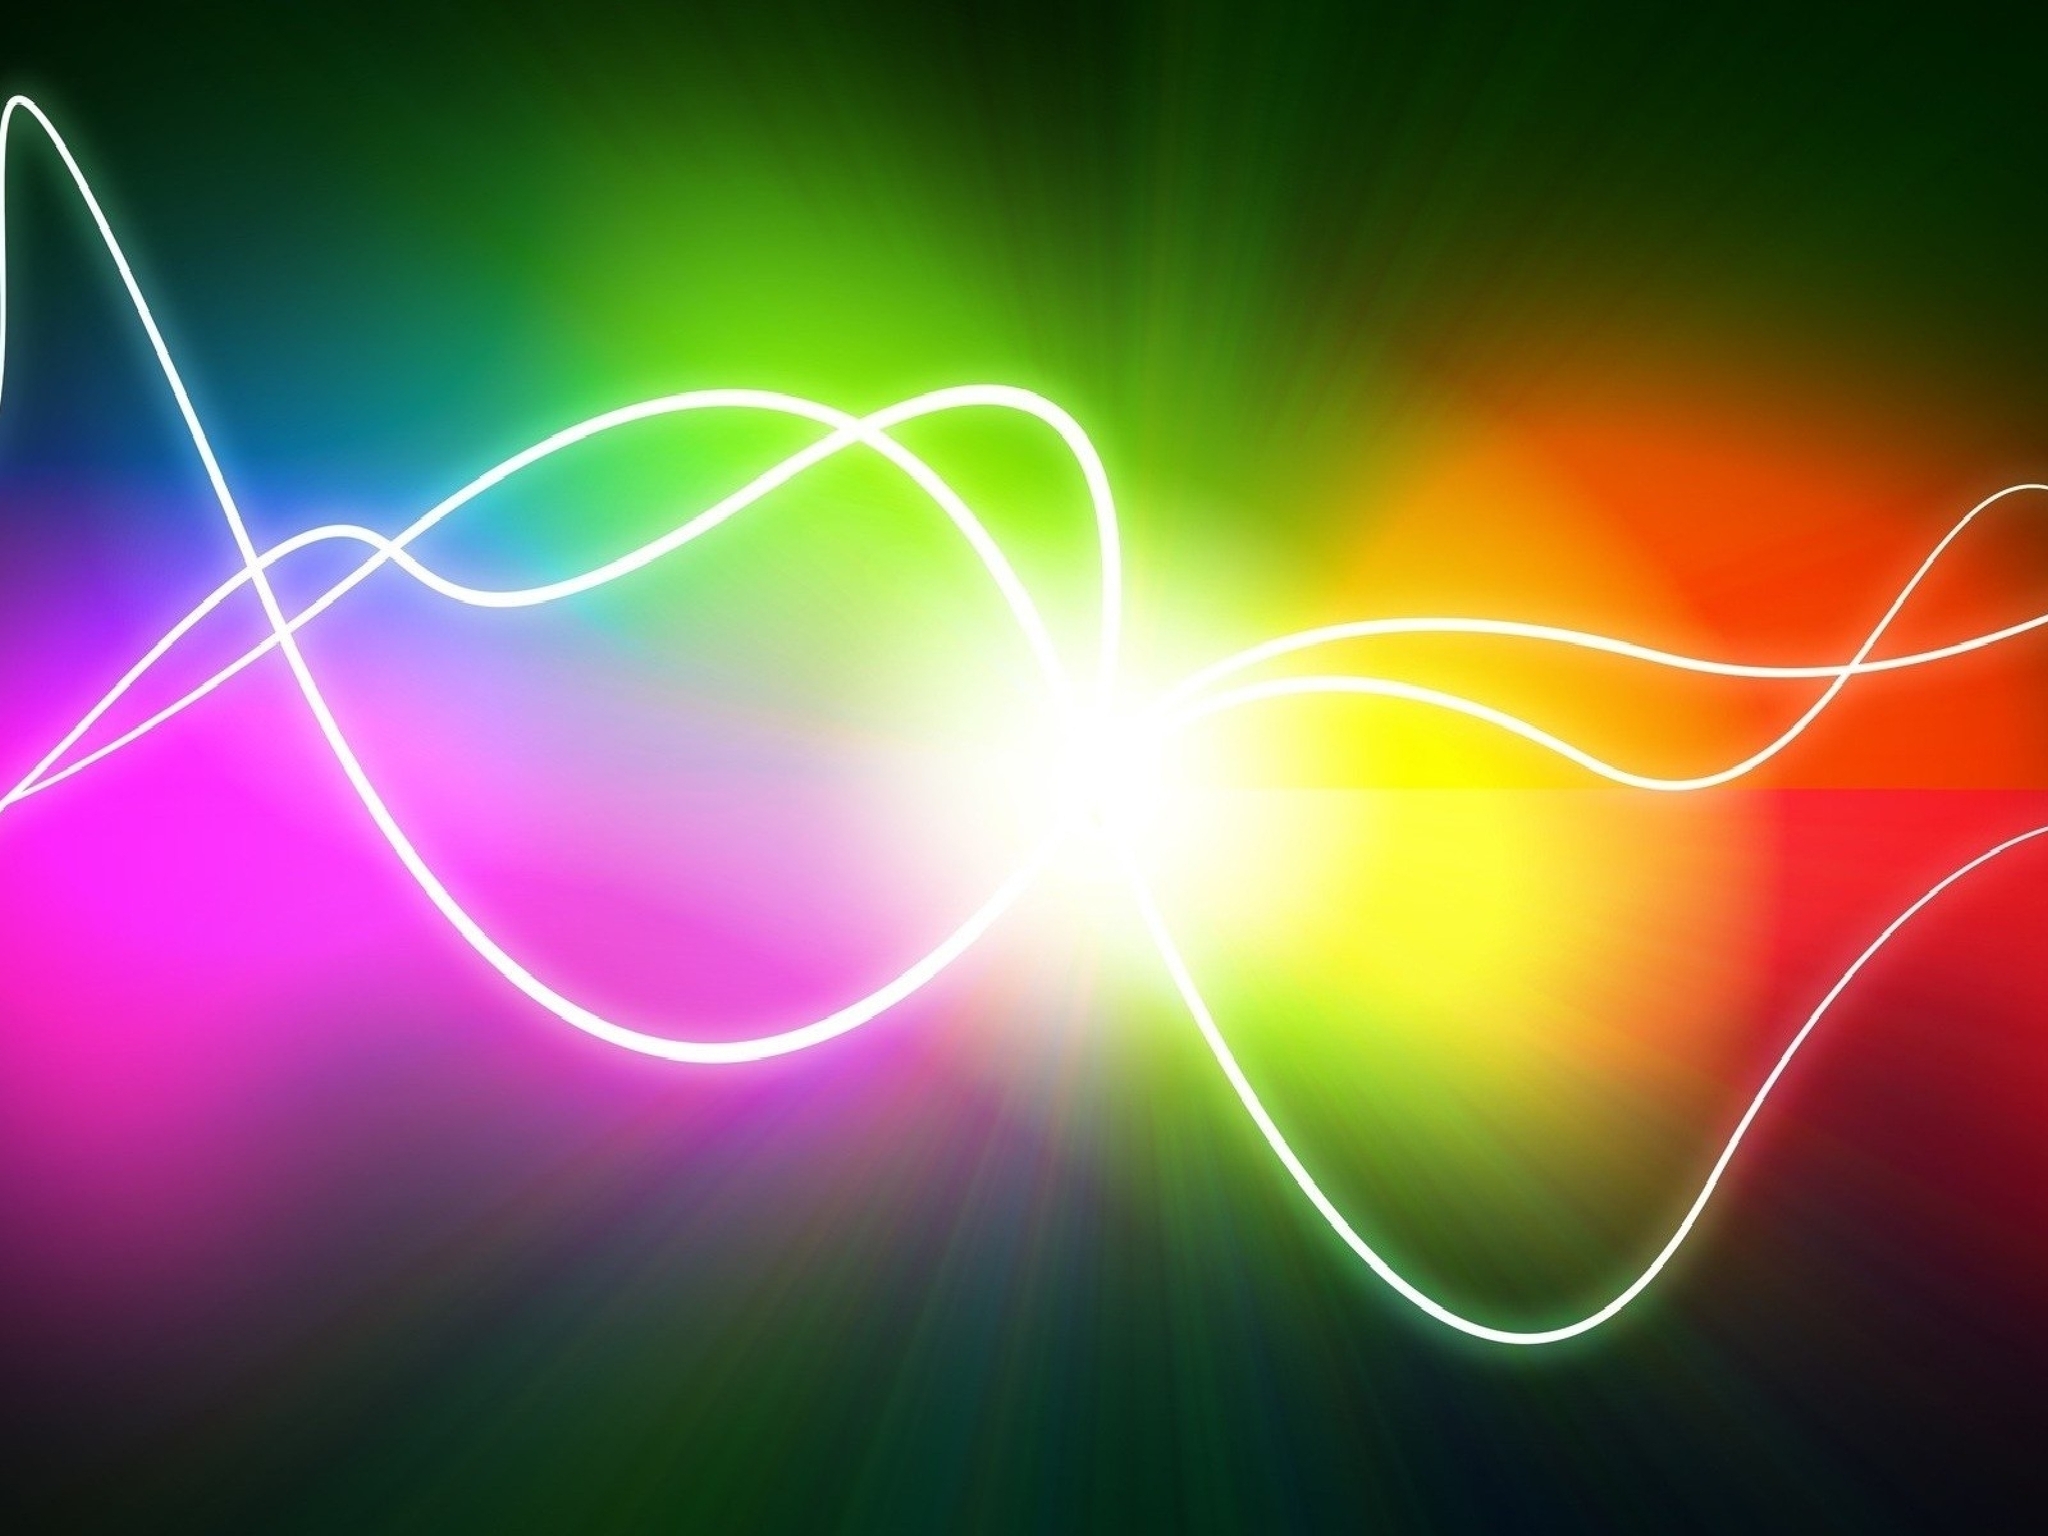 Image: Rays, waves, light, color, spectrum